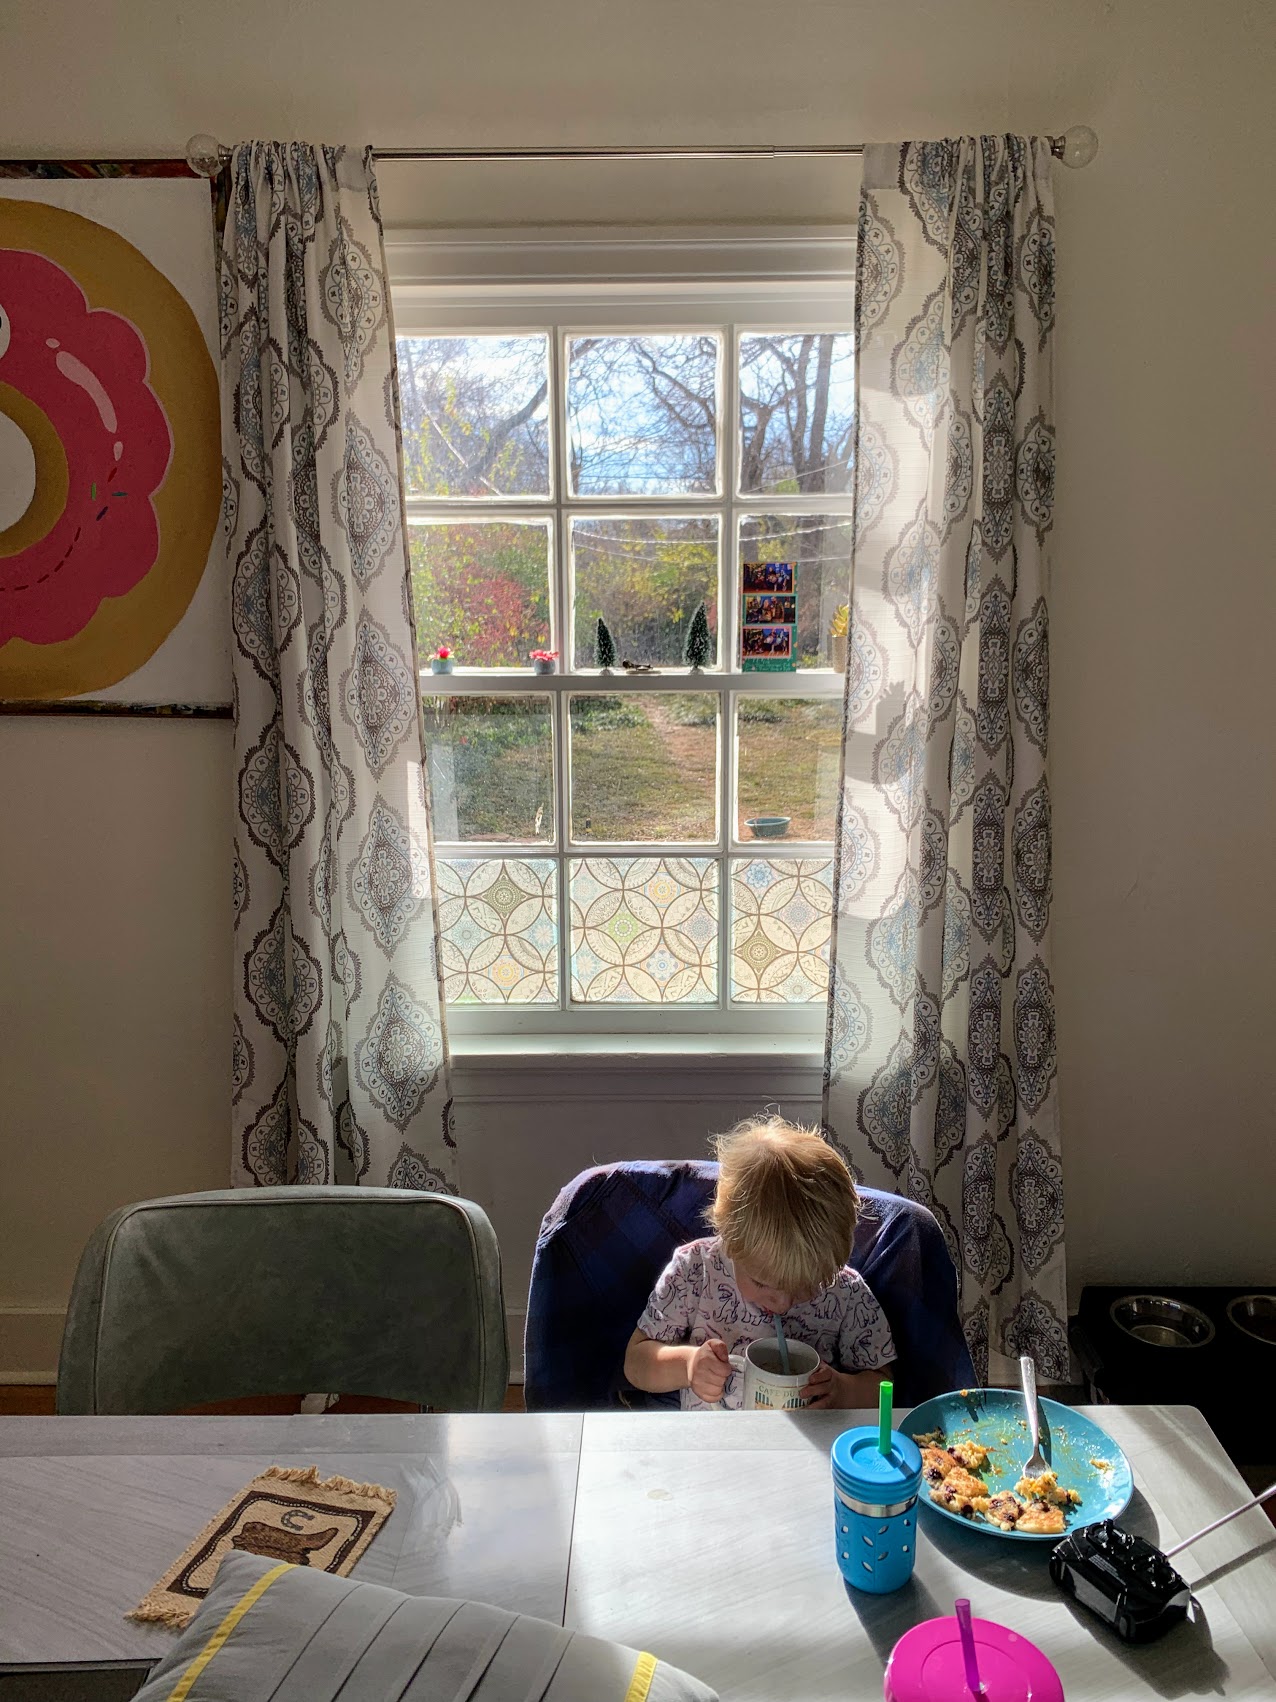 a child sitting at a table eating food